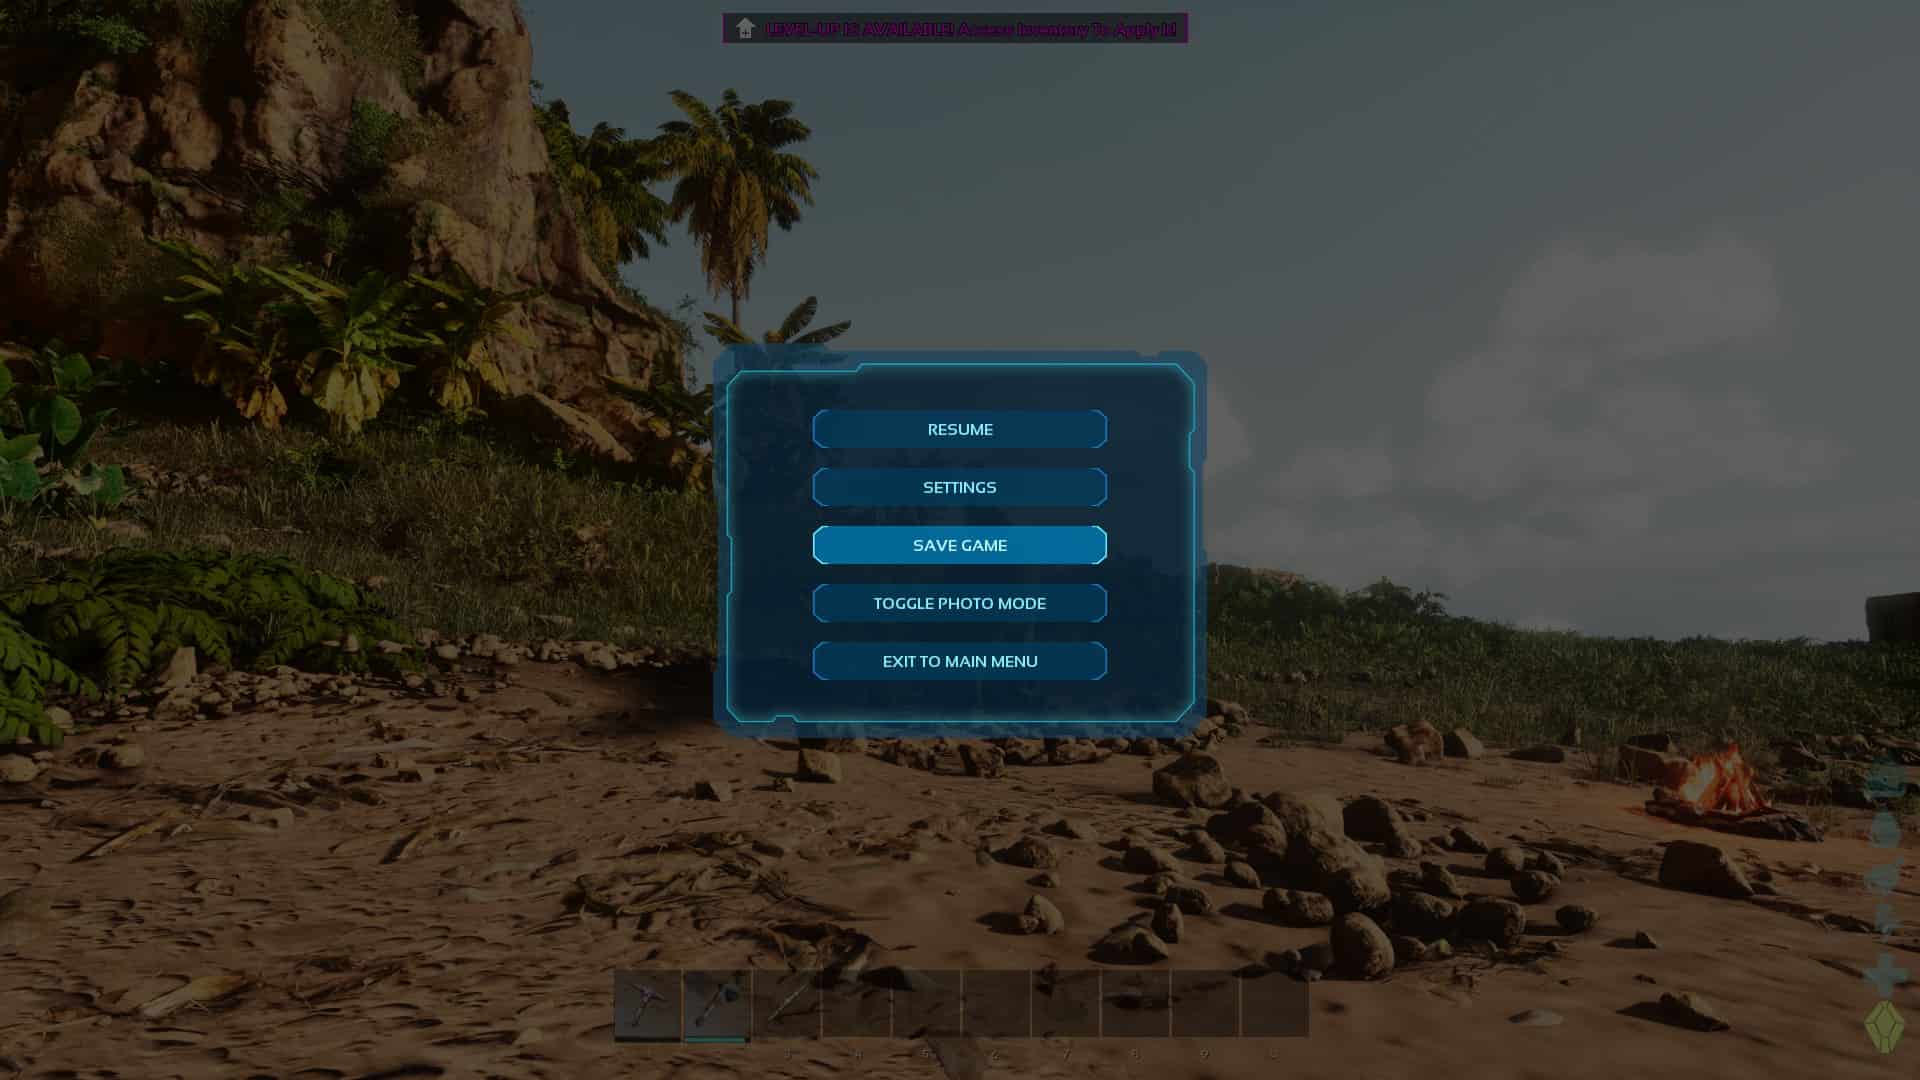 ARK Survival Ascended how to save: The menu showing the save game option